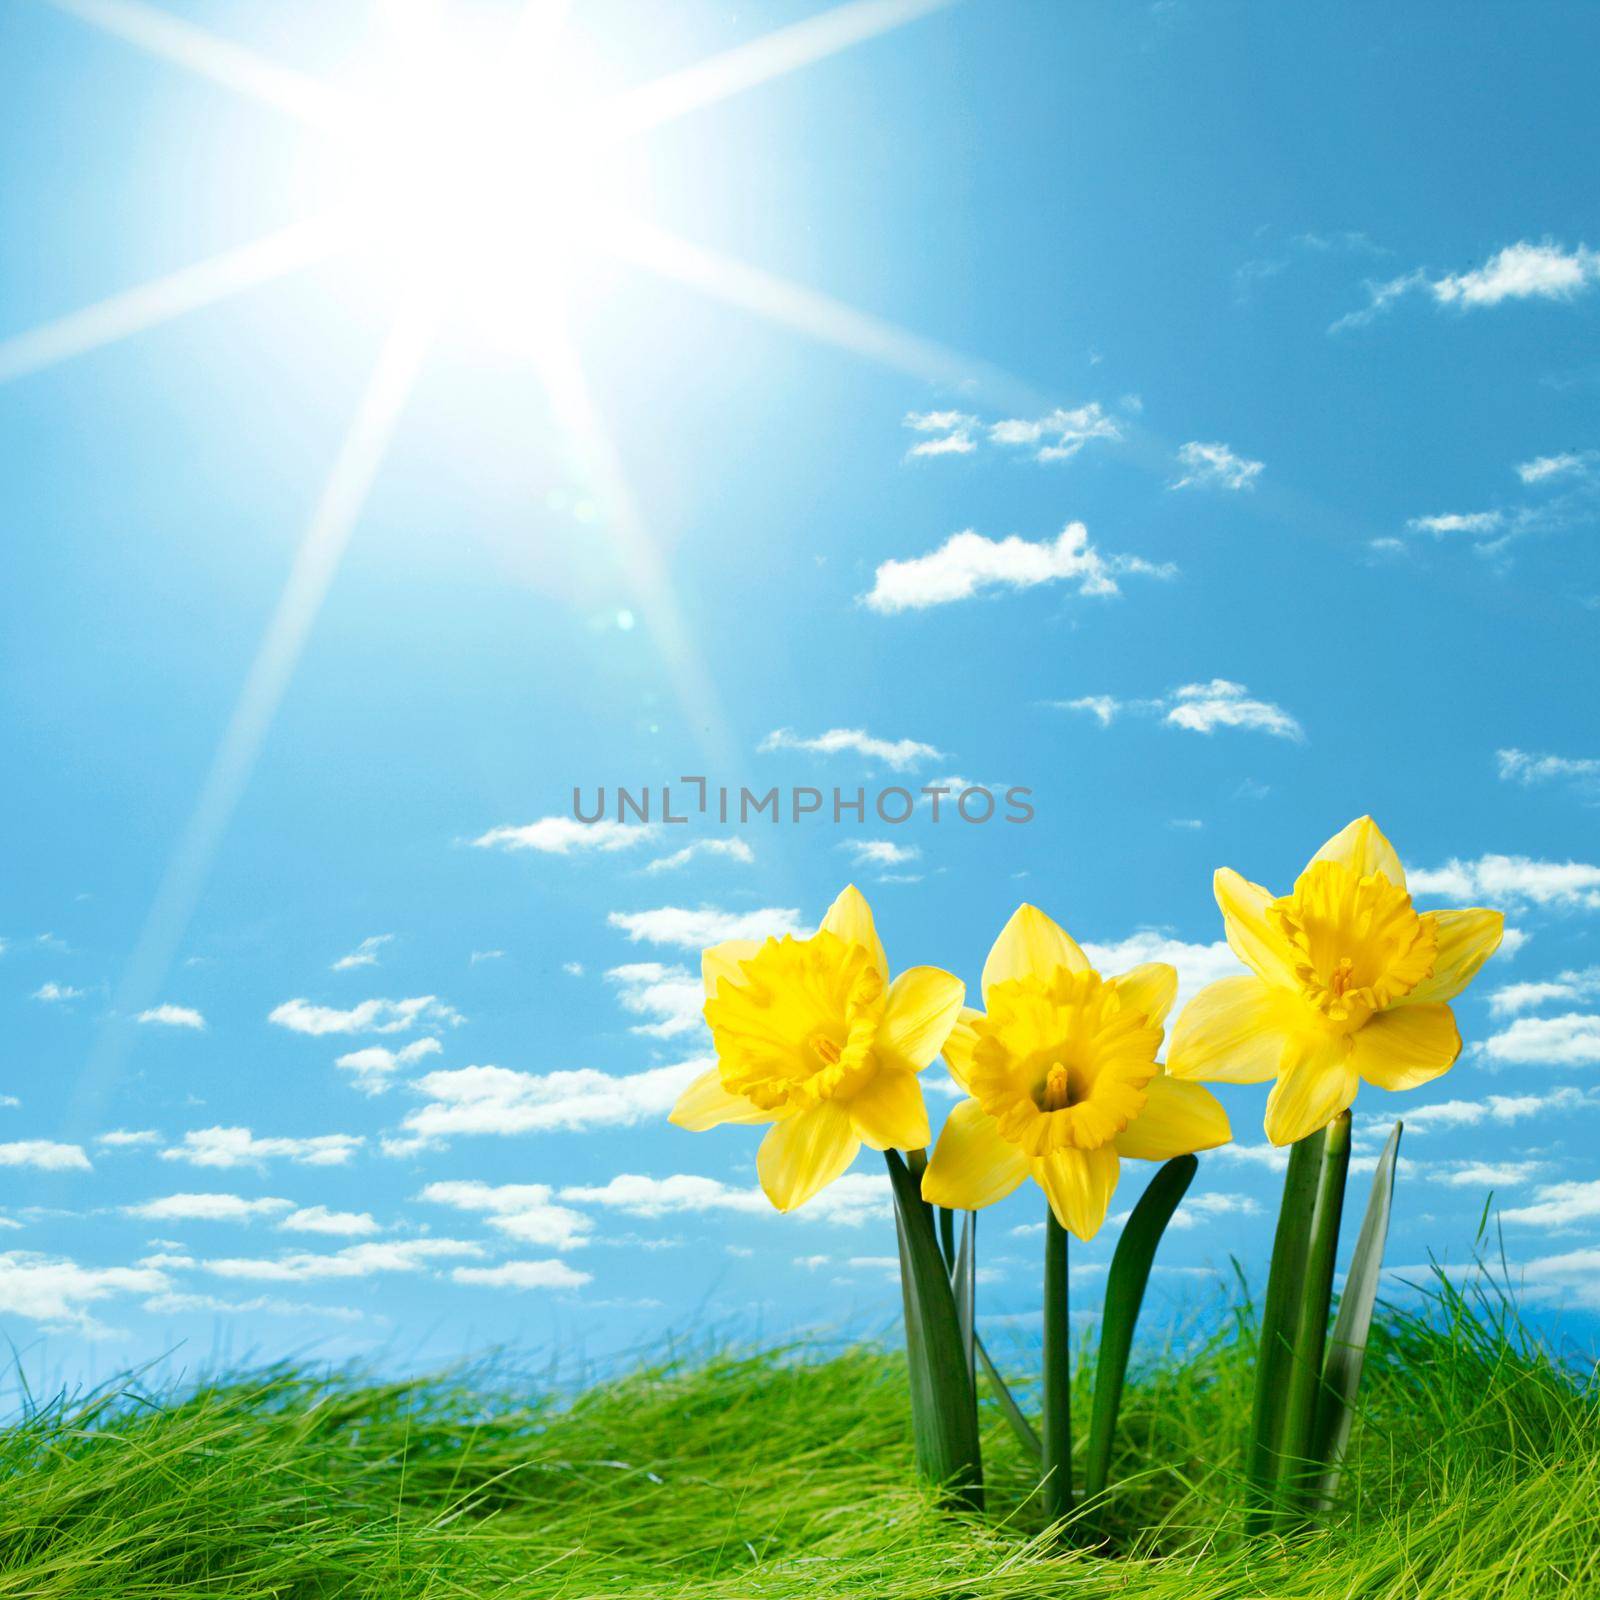 Daffodil flowers in the field under blue sky with sun and clouds